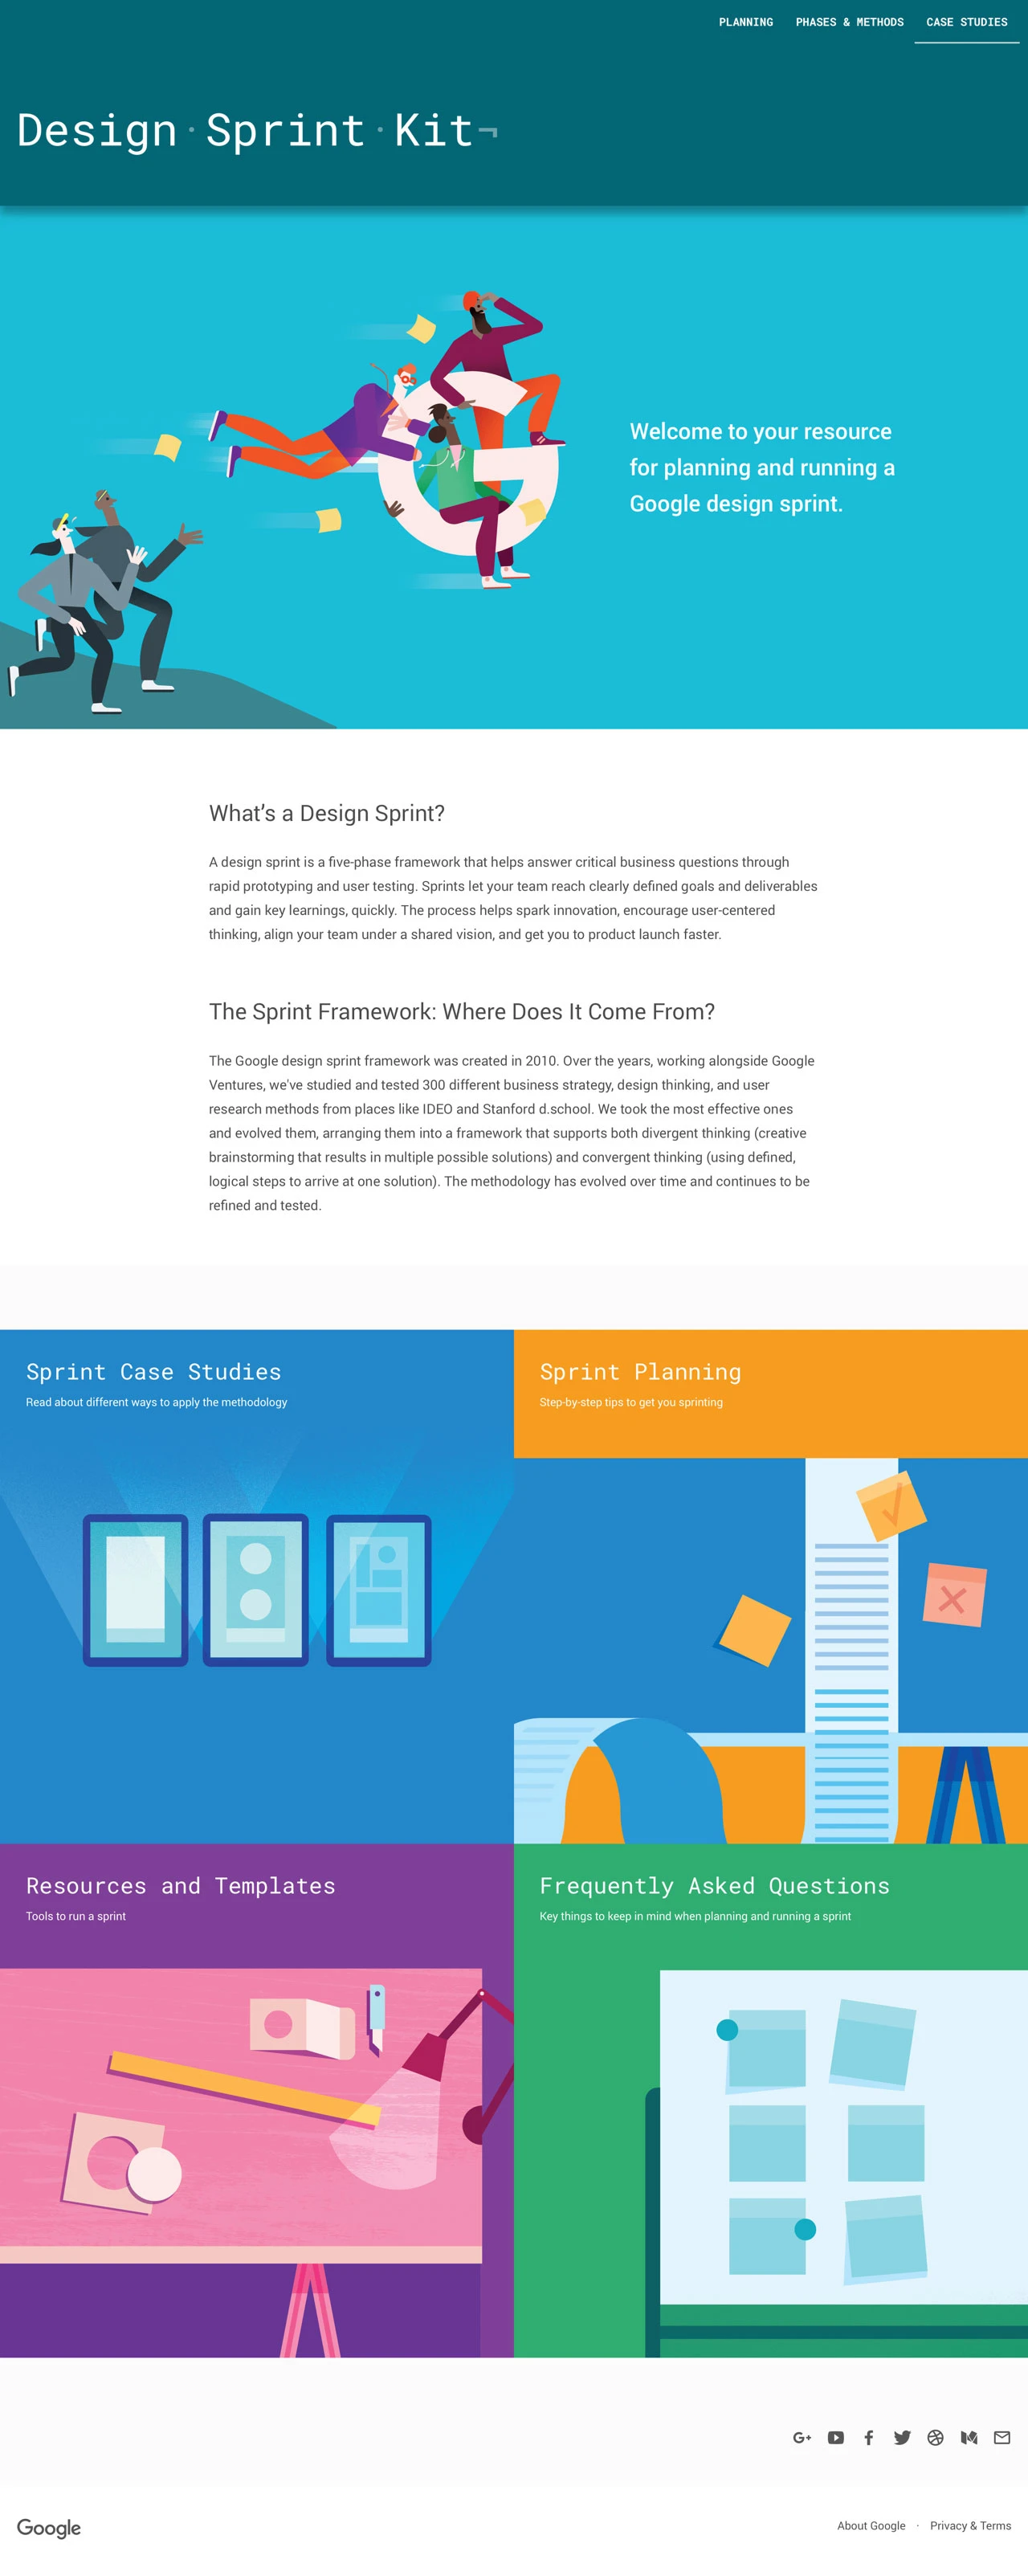 Design Sprint Kit Landing Page Example: The Google design sprint framework was created in 2010. Over the years, working alongside Google Ventures, we've studied and tested 300 different business strategy, design thinking, and user research methods from places like IDEO and Stanford d.school.